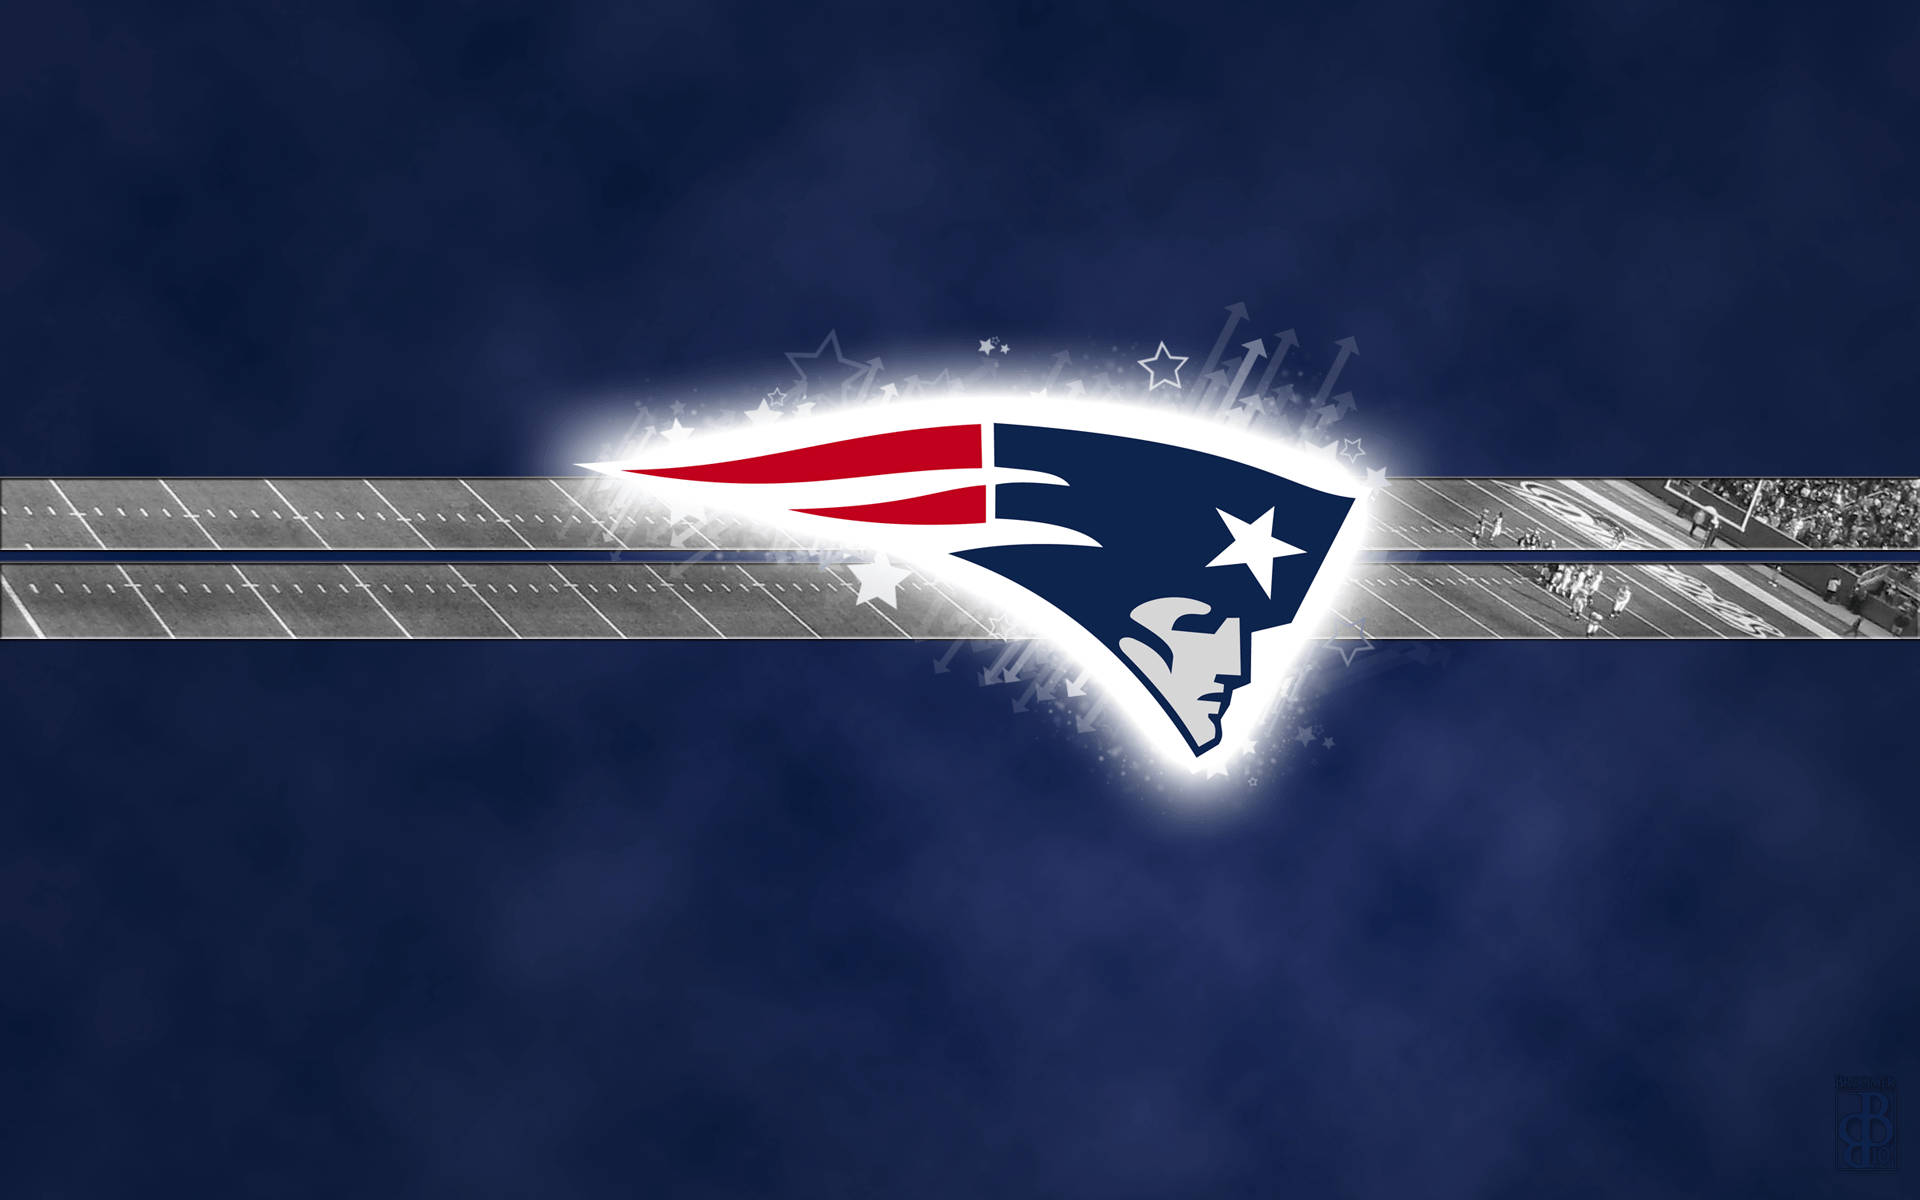 Home Of The Patriots Wallpaper